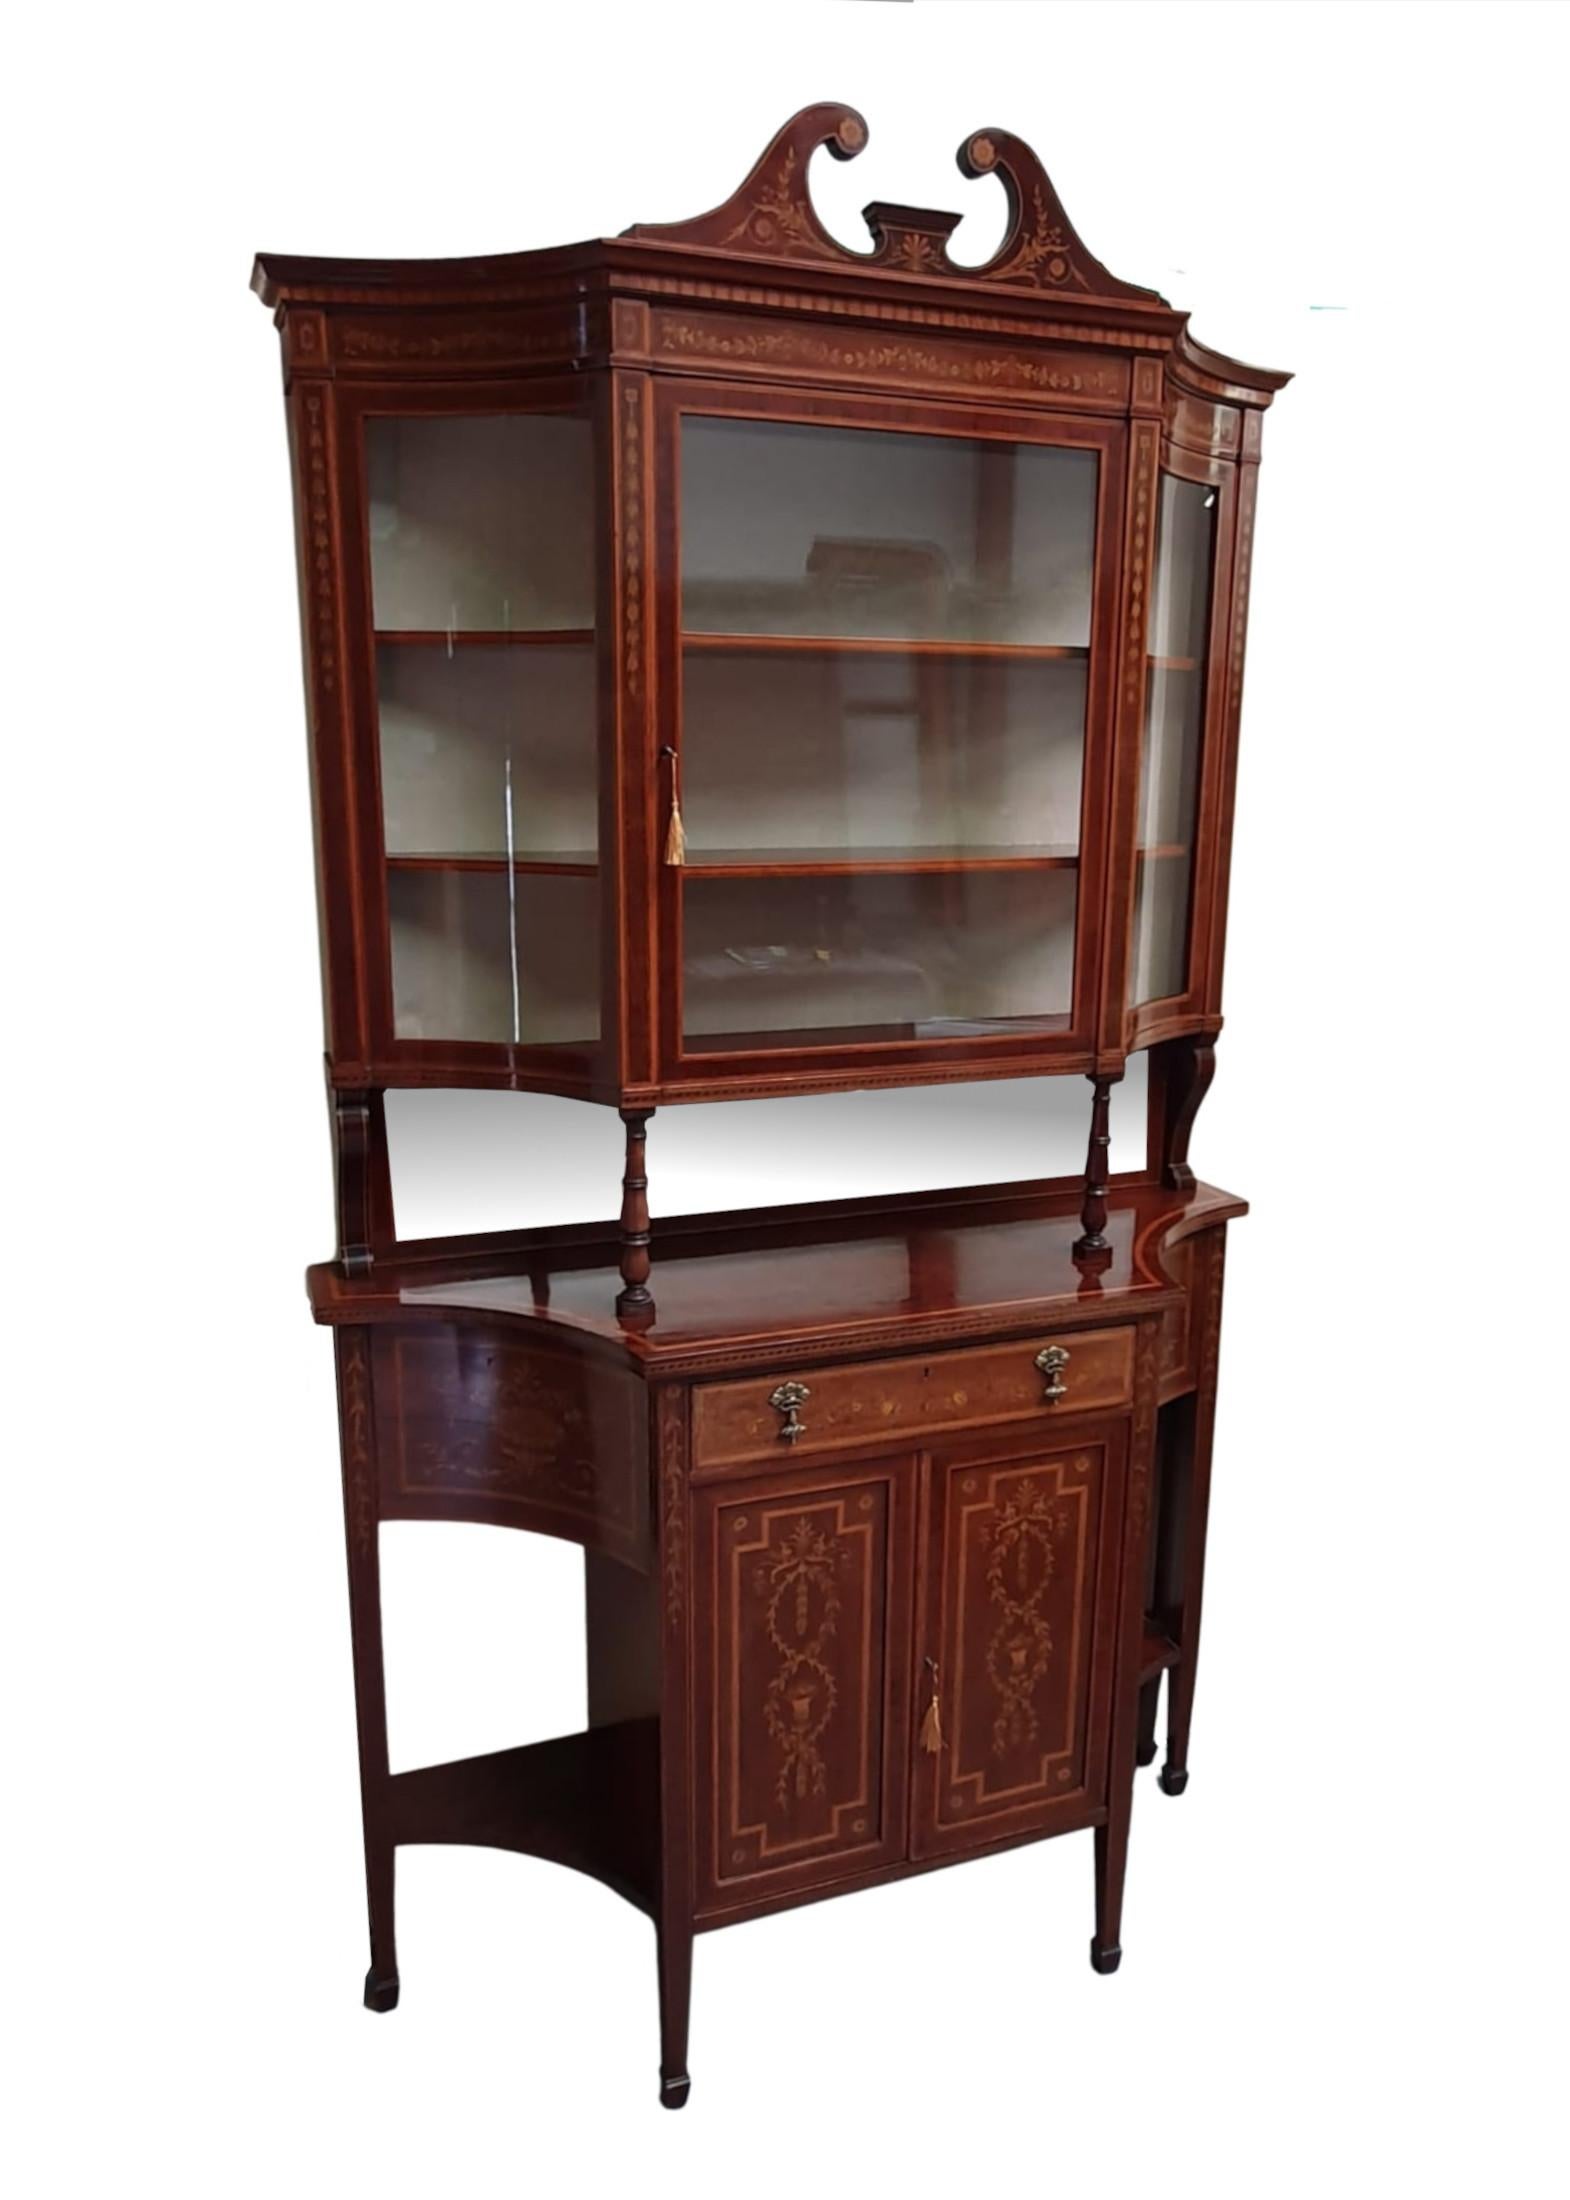 A rare and very fine Edwardian mahogany display case by 'Edward and Roberts'. Inlaid with intricate floral marquetry throughout depicting swags, garlands, flowerheads and trailing bell flowers. The moulded stepped broken swan neck pediment raised